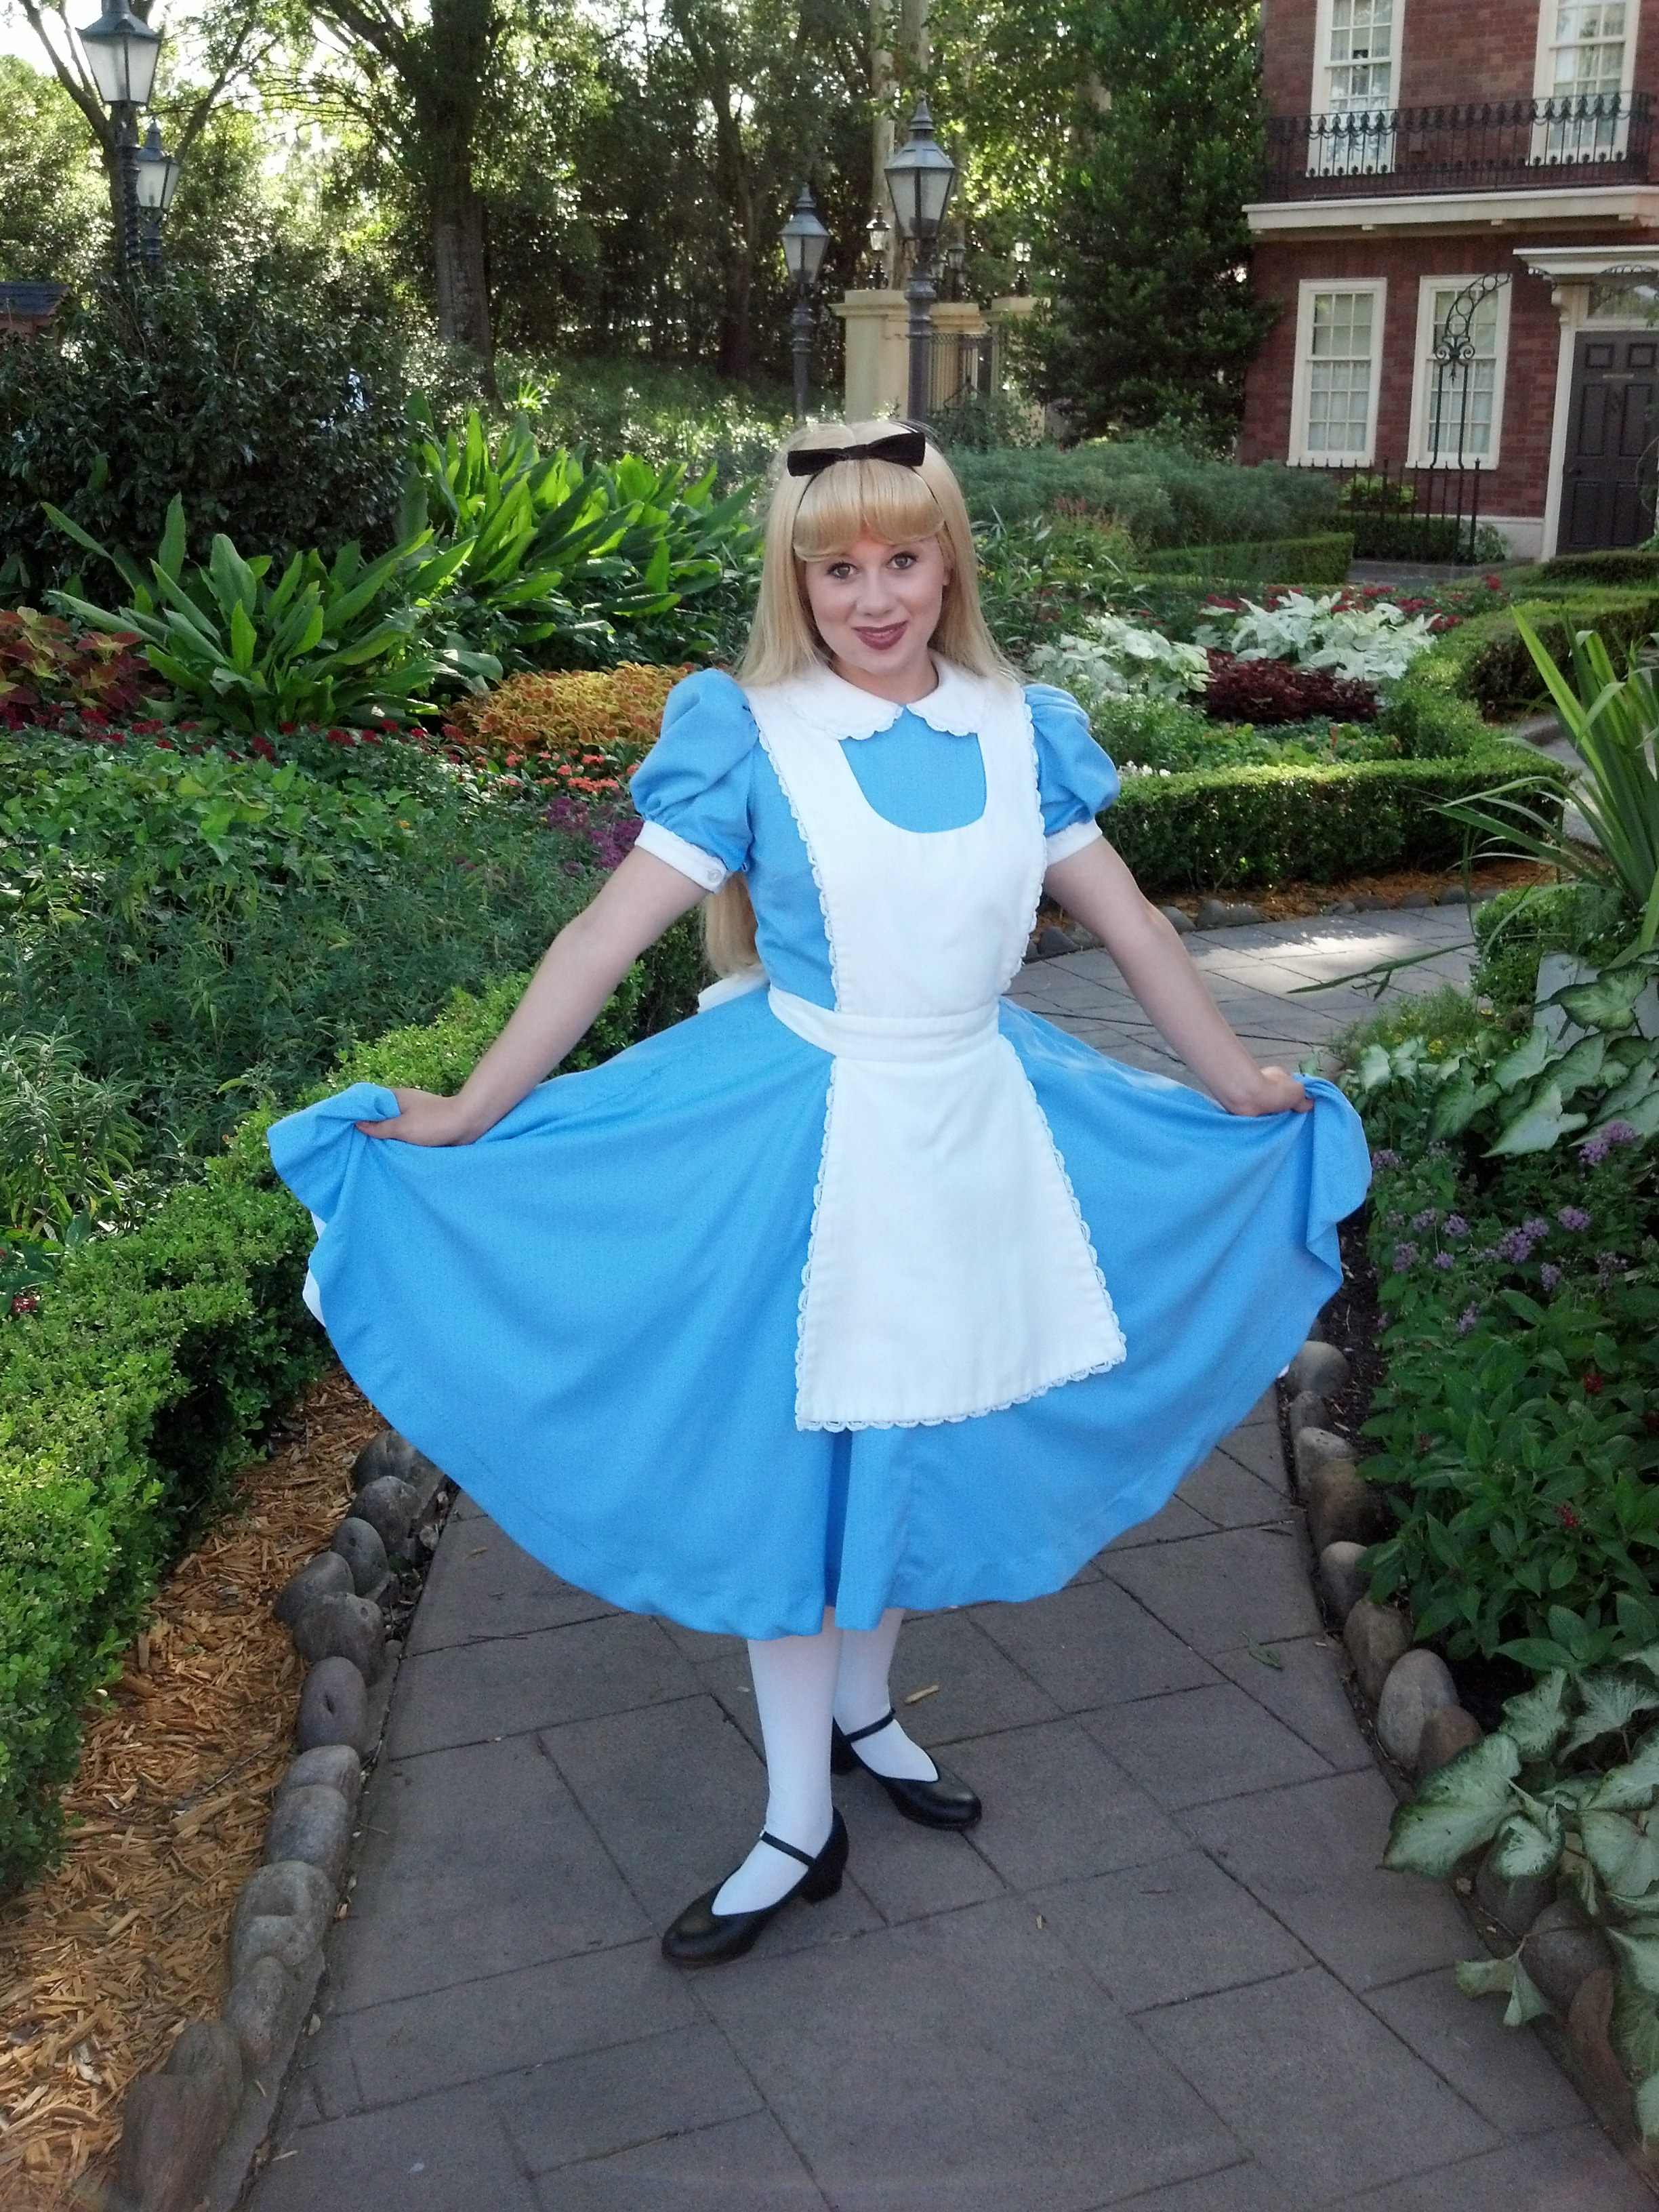 Alice at United Kingdom in Epcot - KennythePirate.com